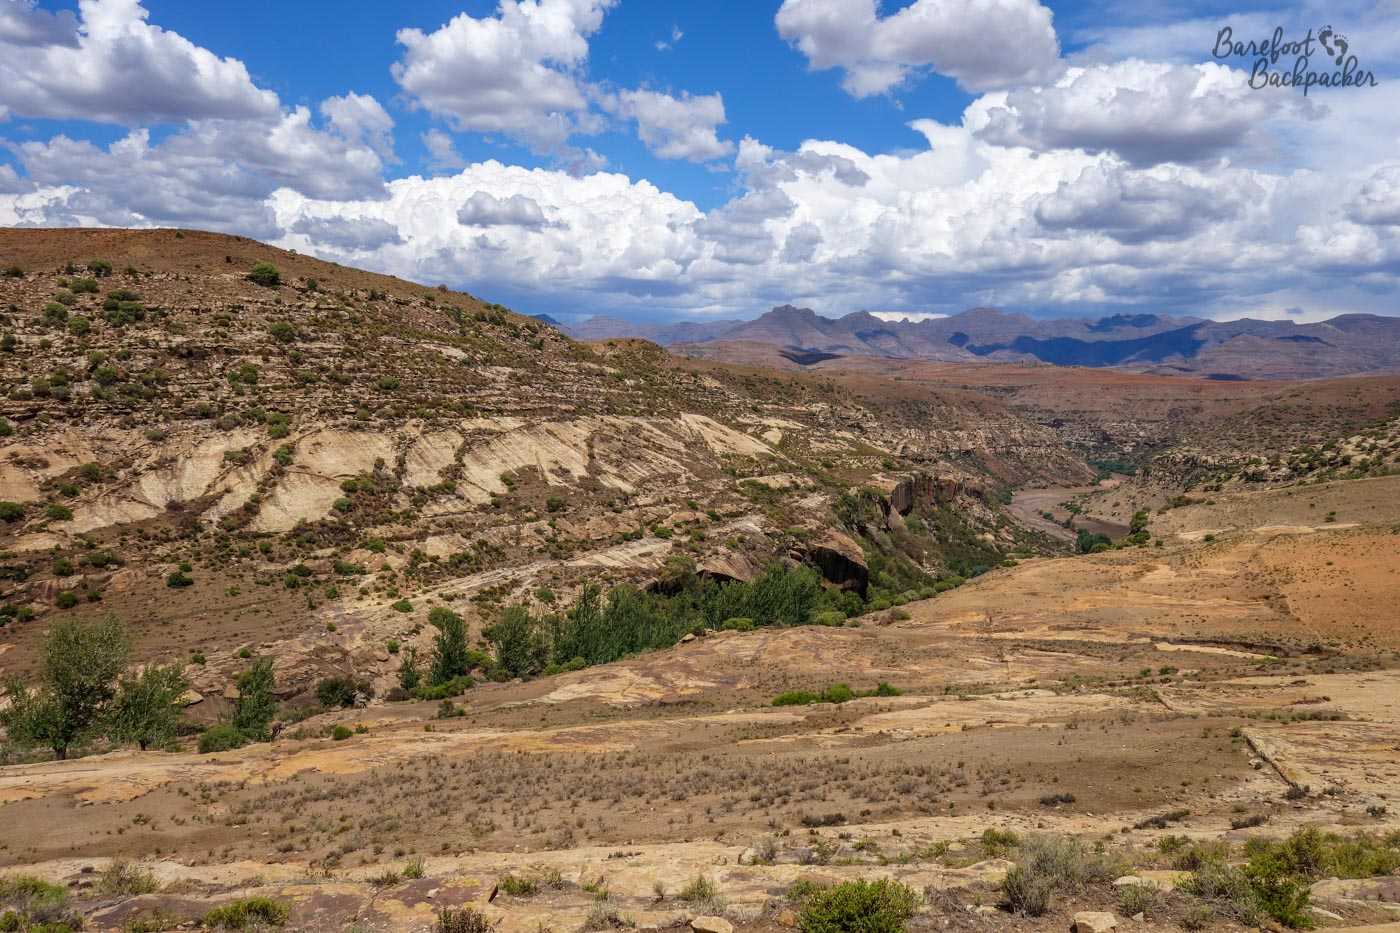 Hiking through the mountains in Lesotho.